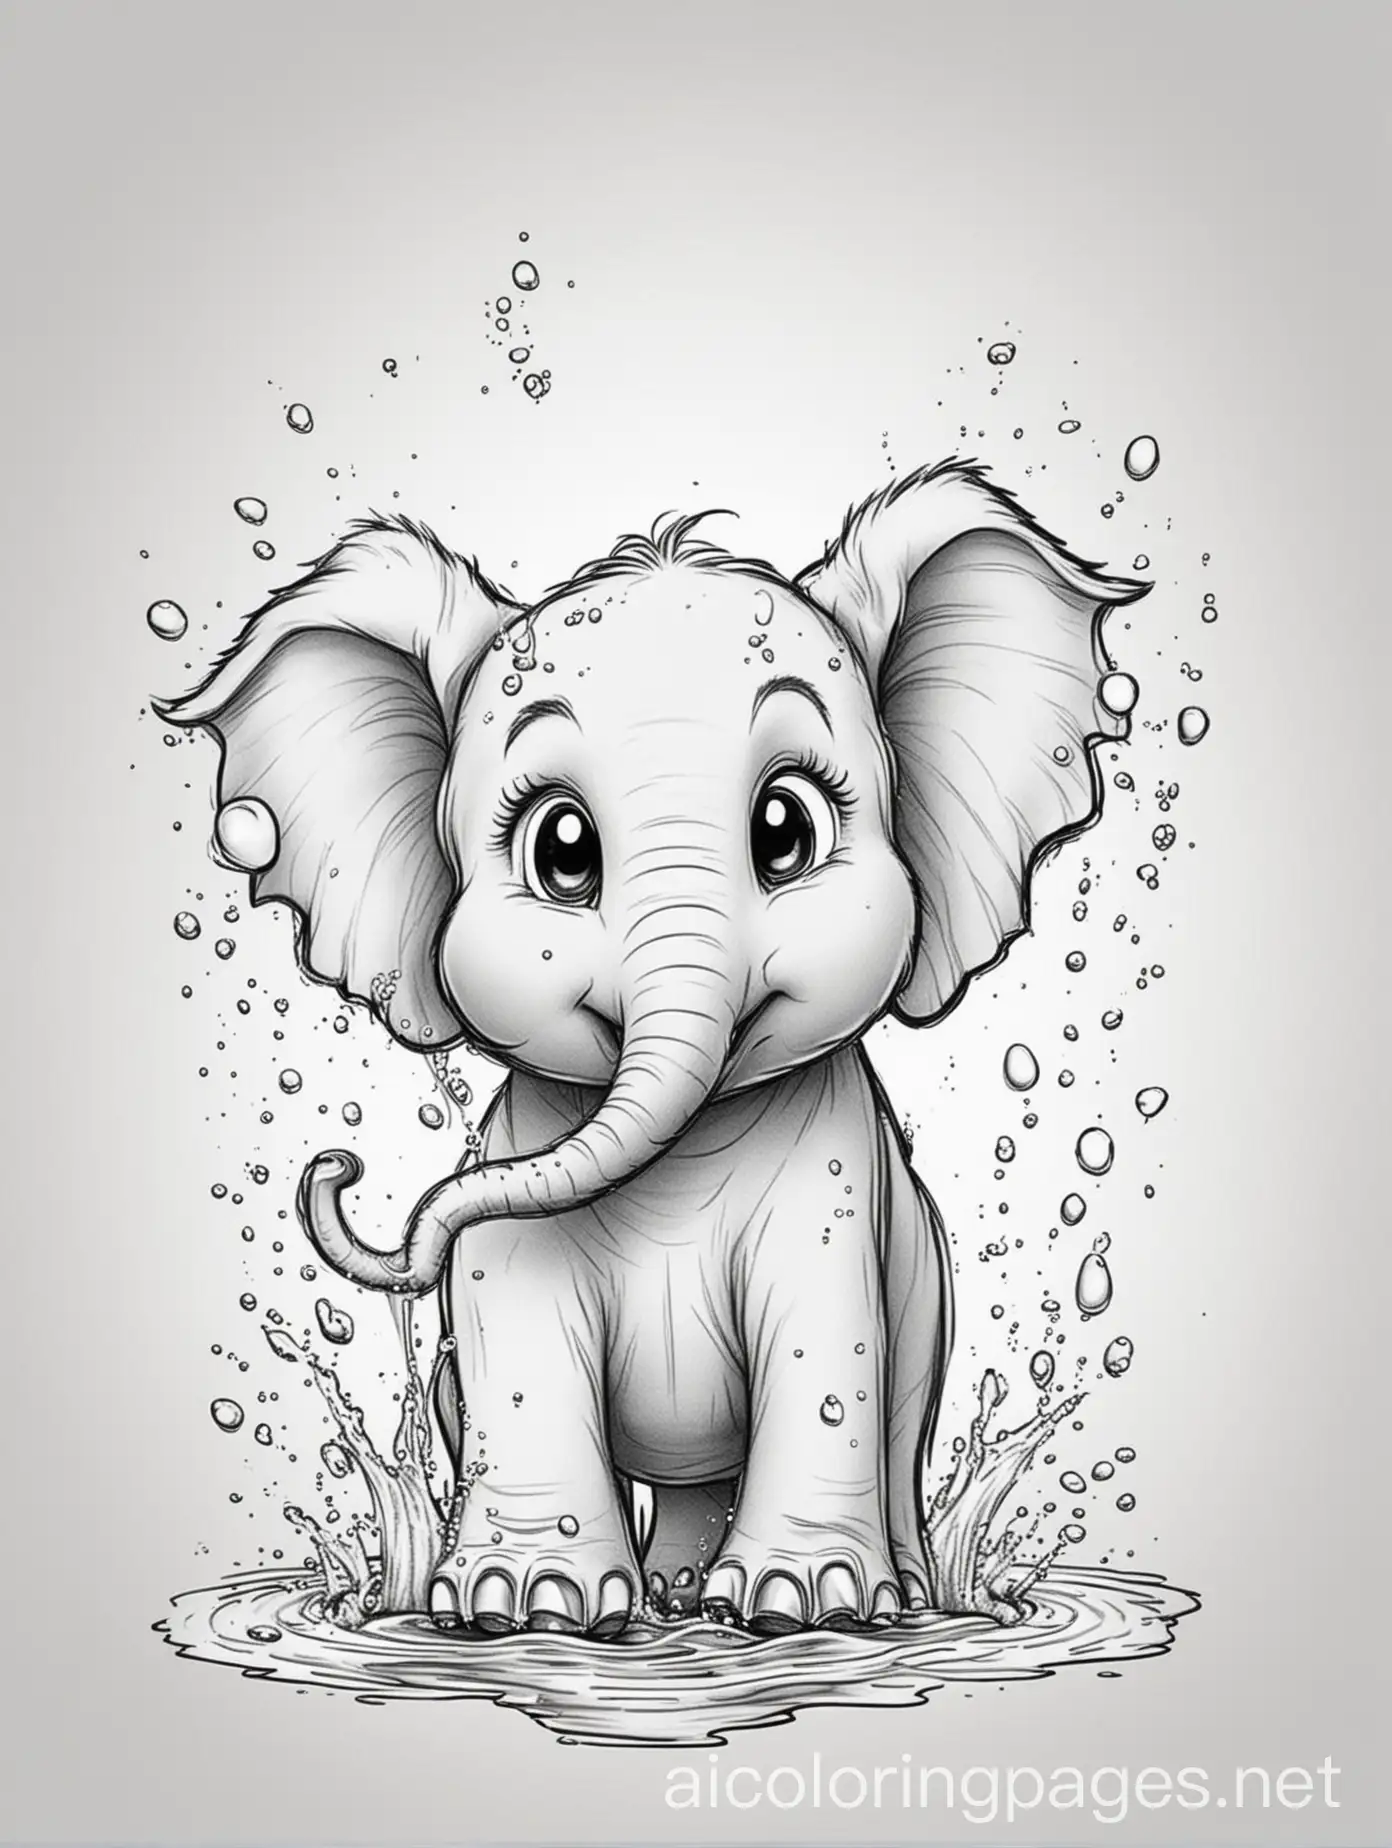 Adorable-Elephant-Splashing-Water-Coloring-Page